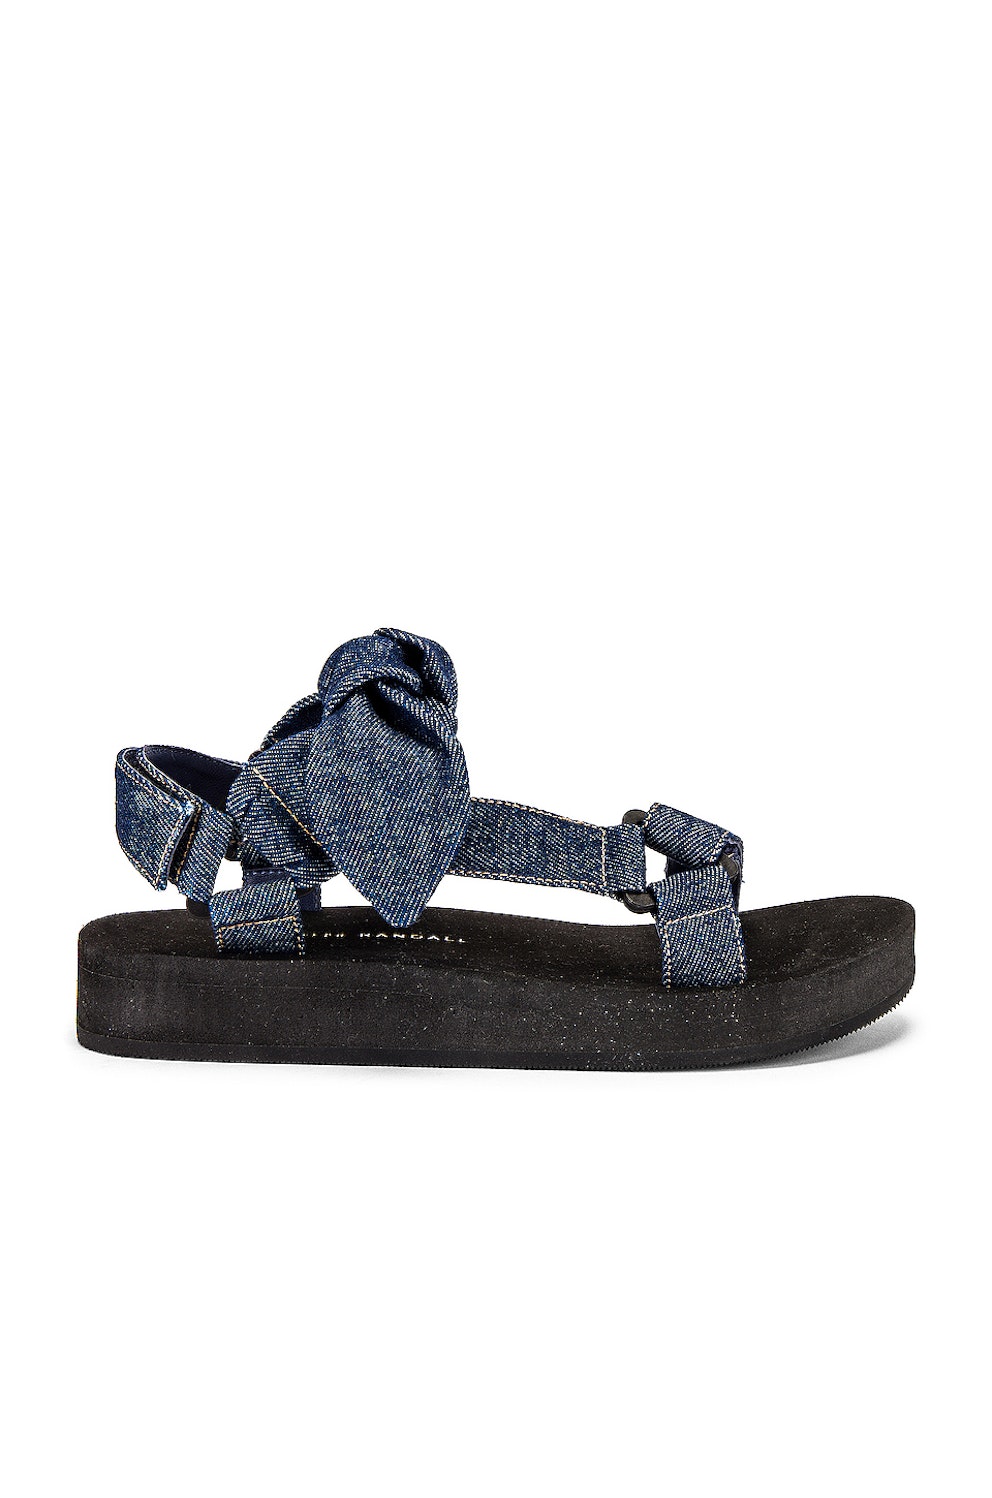 Dad Sandals For Women: The Best, Most Comfortable Pairs To Buy ...